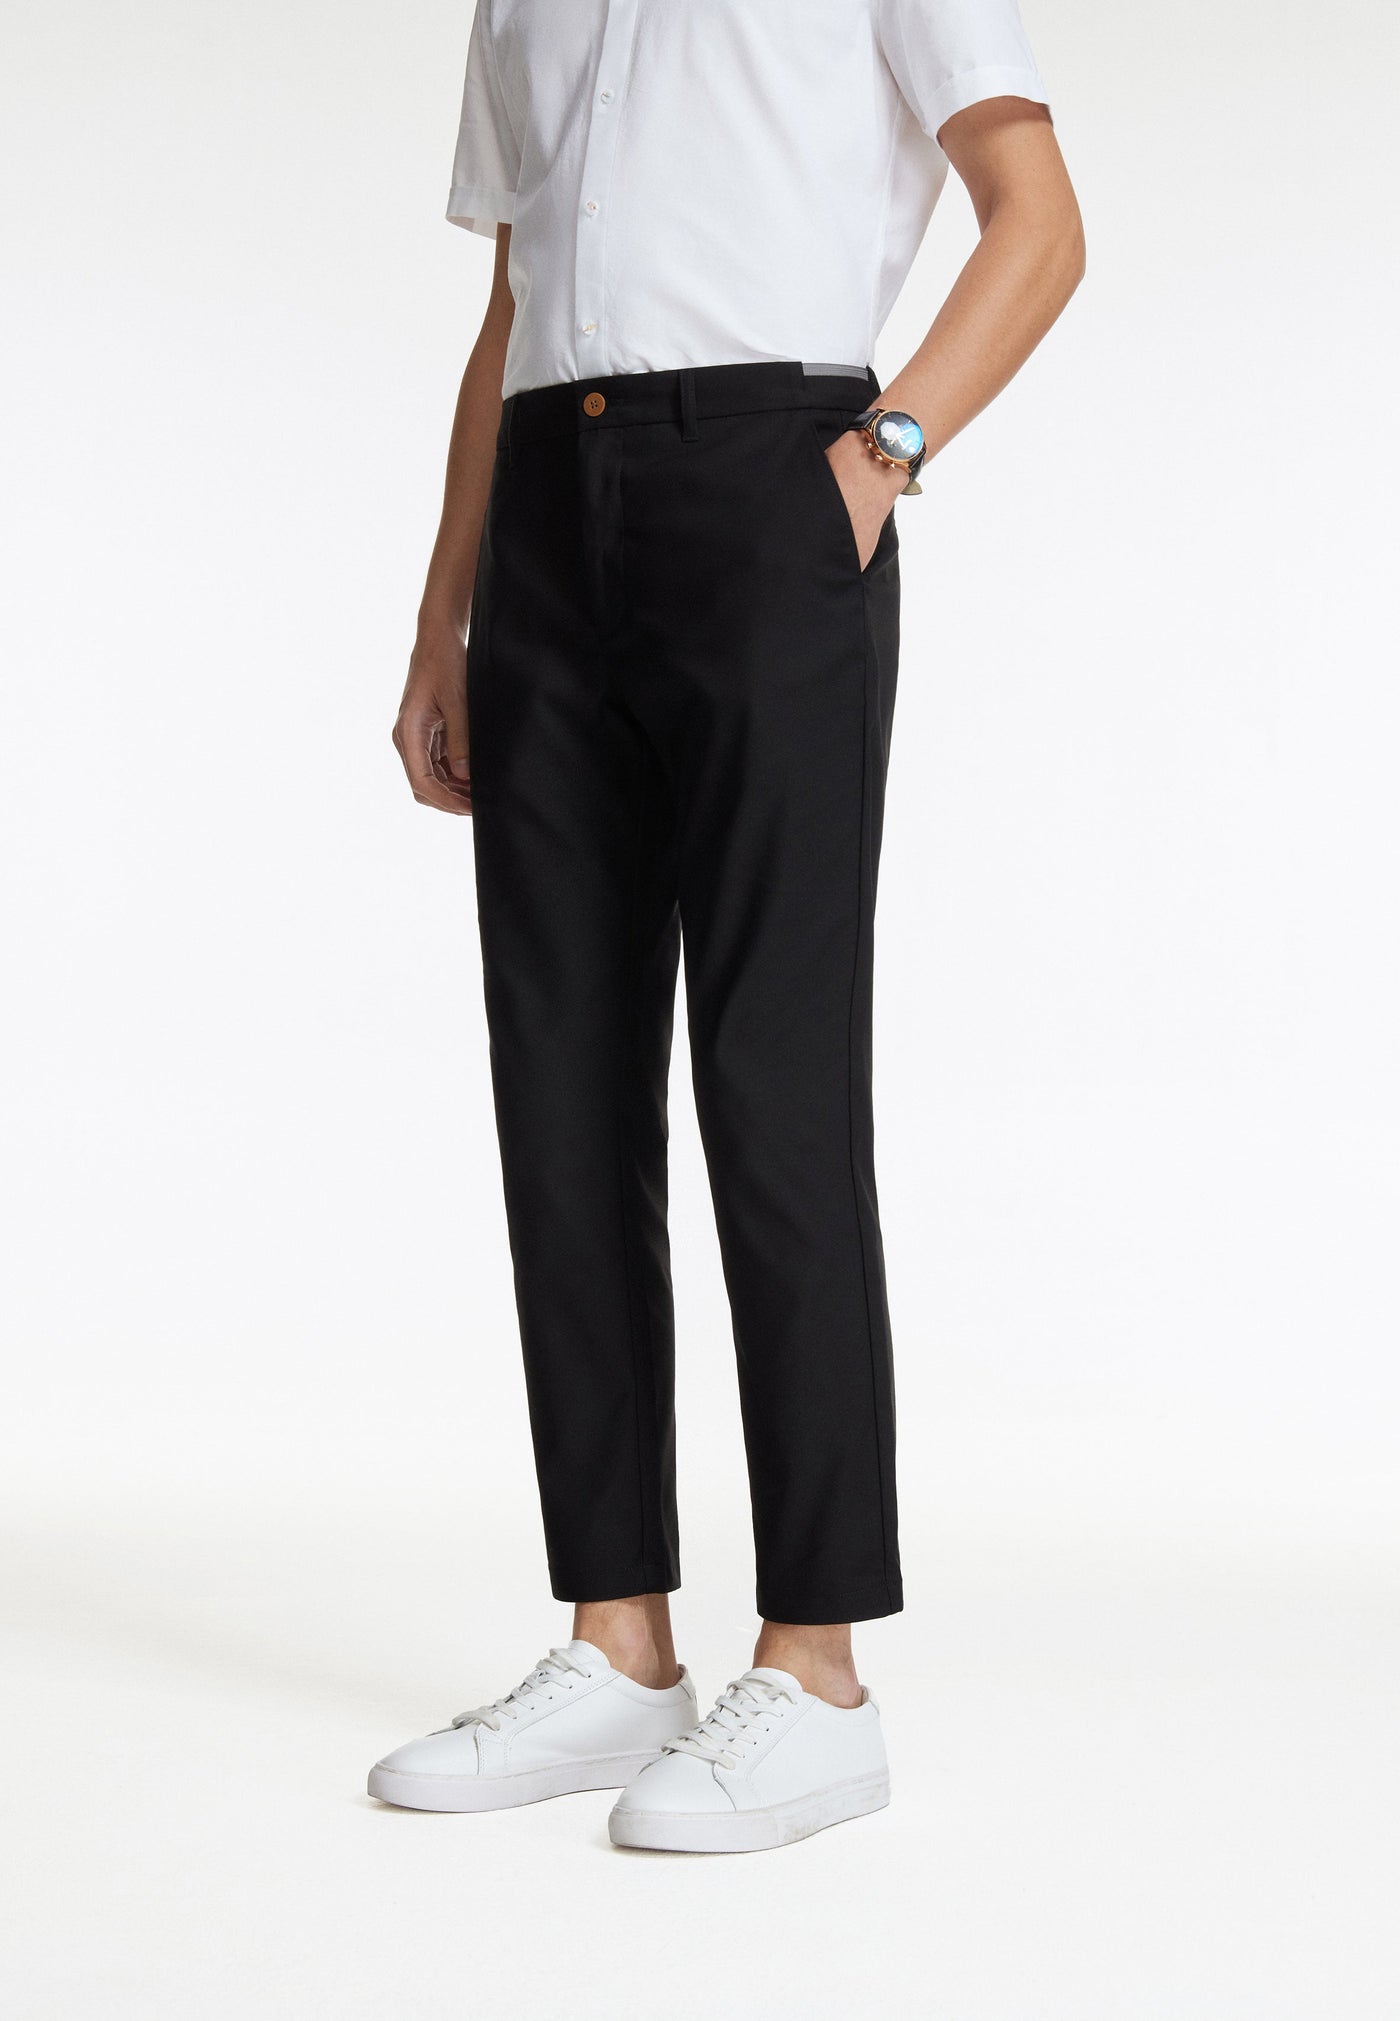 Mencody - Soft Cotton Rich Causal Pants Slim Tapered Fit